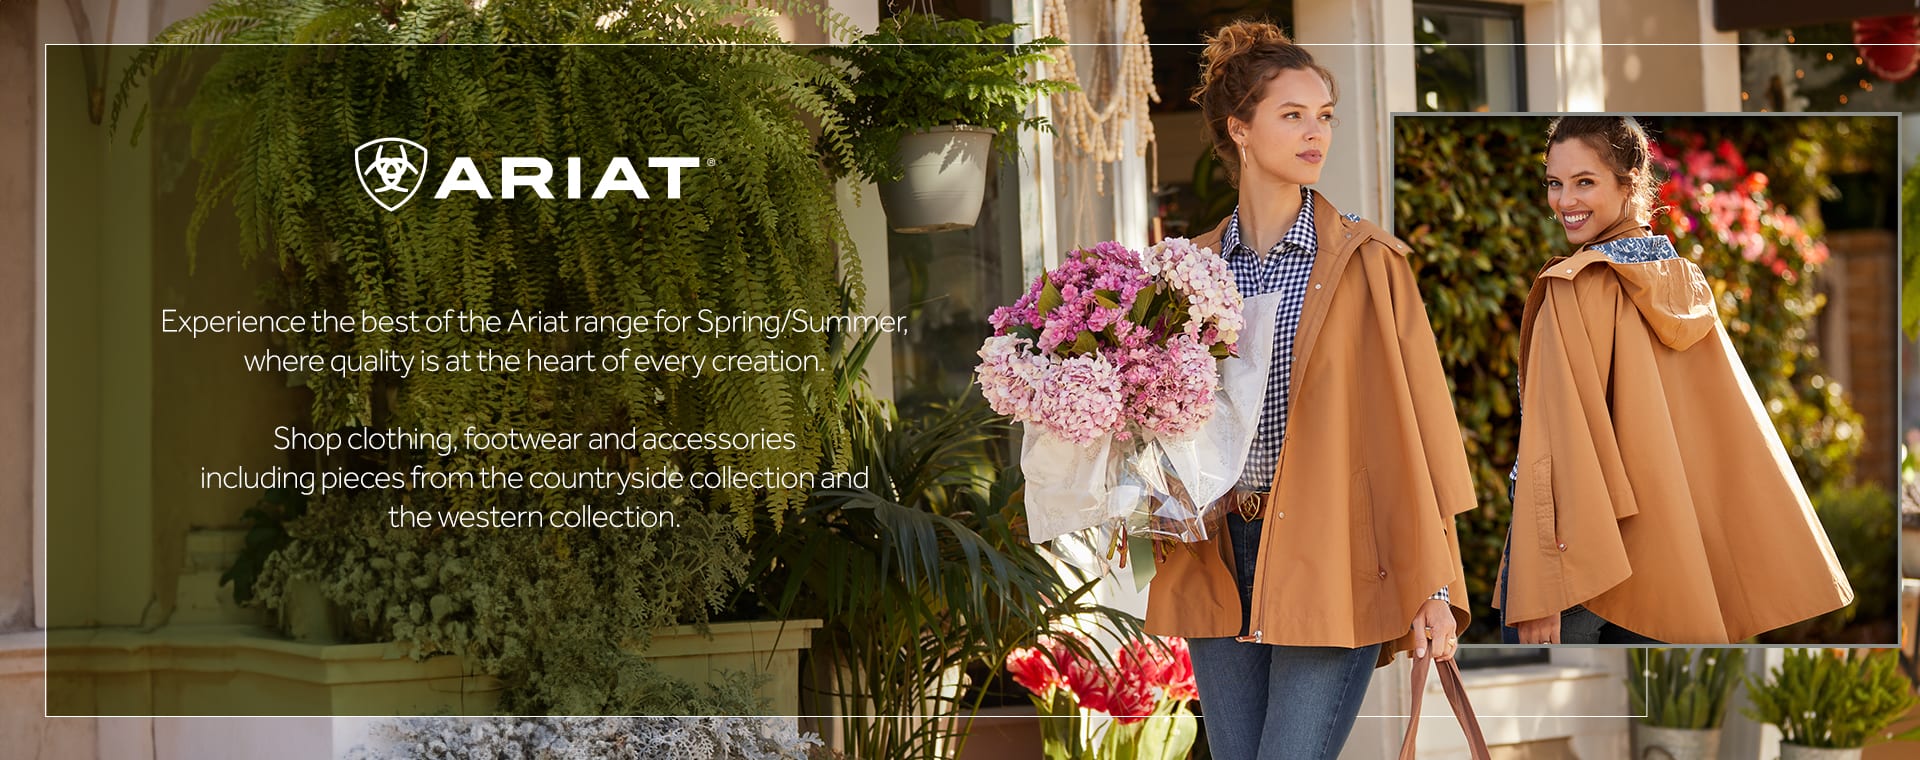 Shop Ariat Boots, Wellies and Clothing